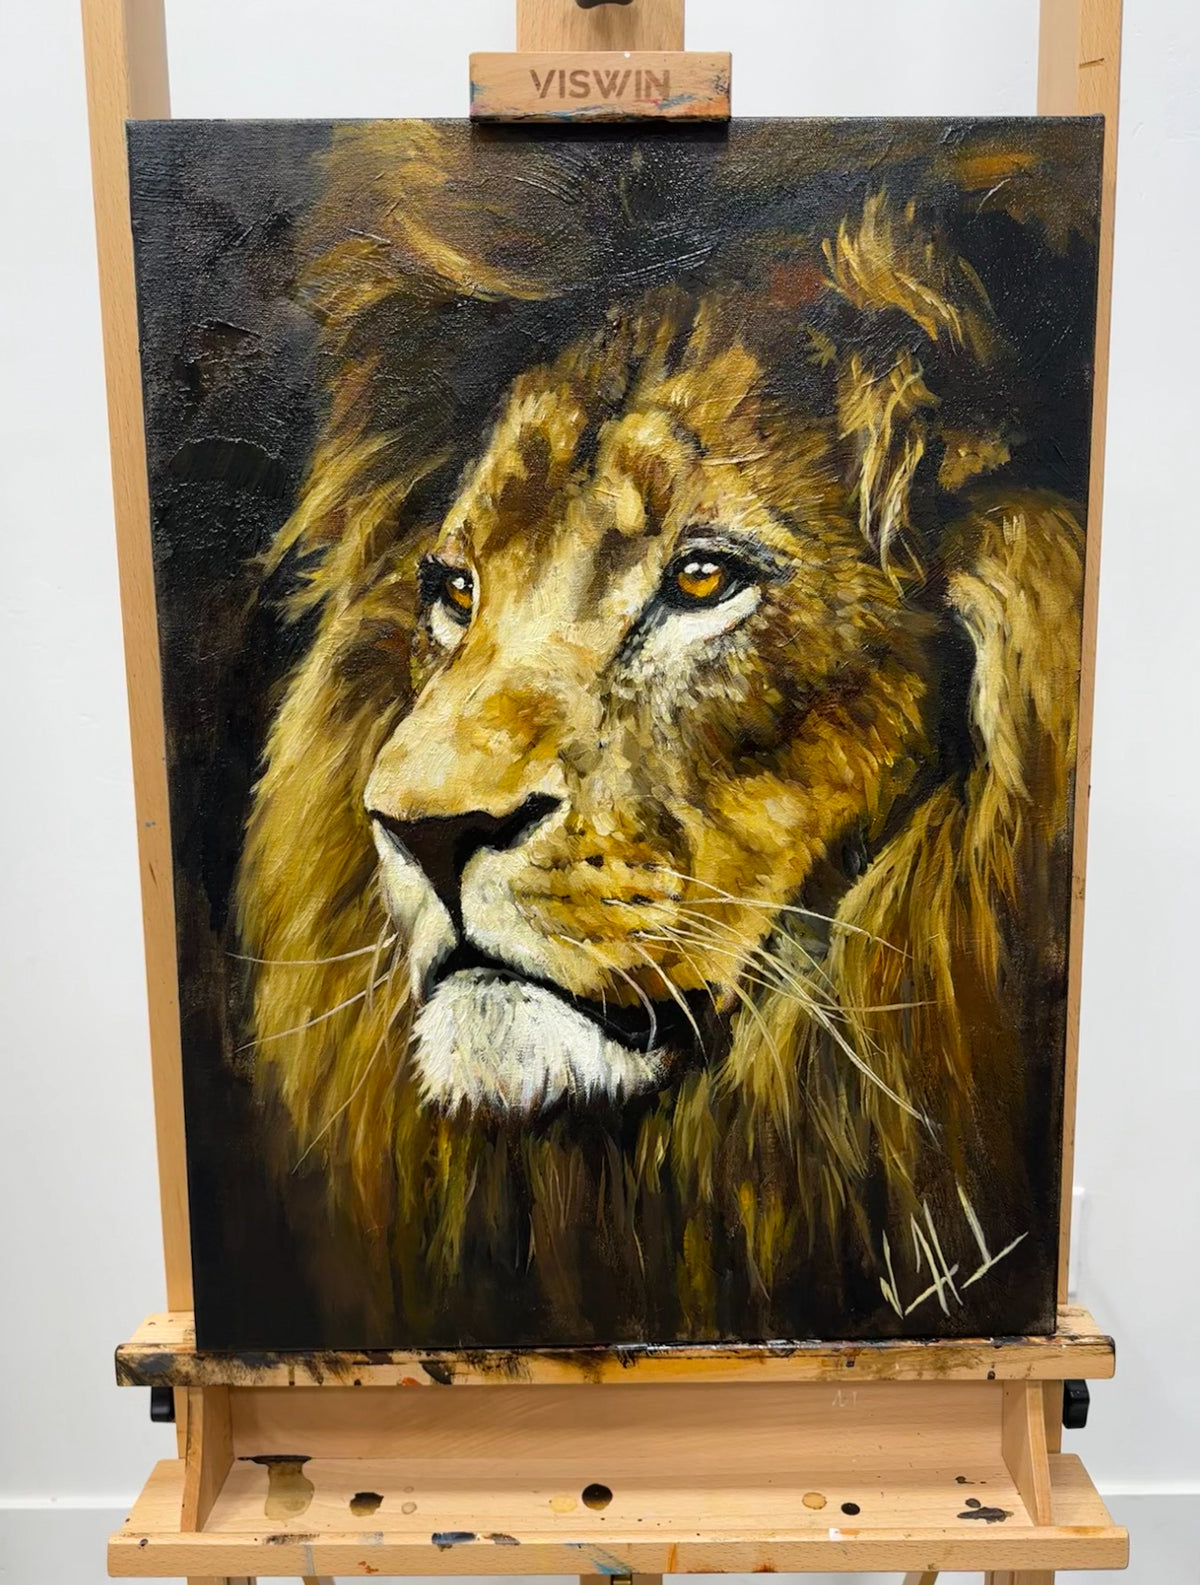 Majestic Lion - 18”x24” Original Mixed-Media Oil Painting